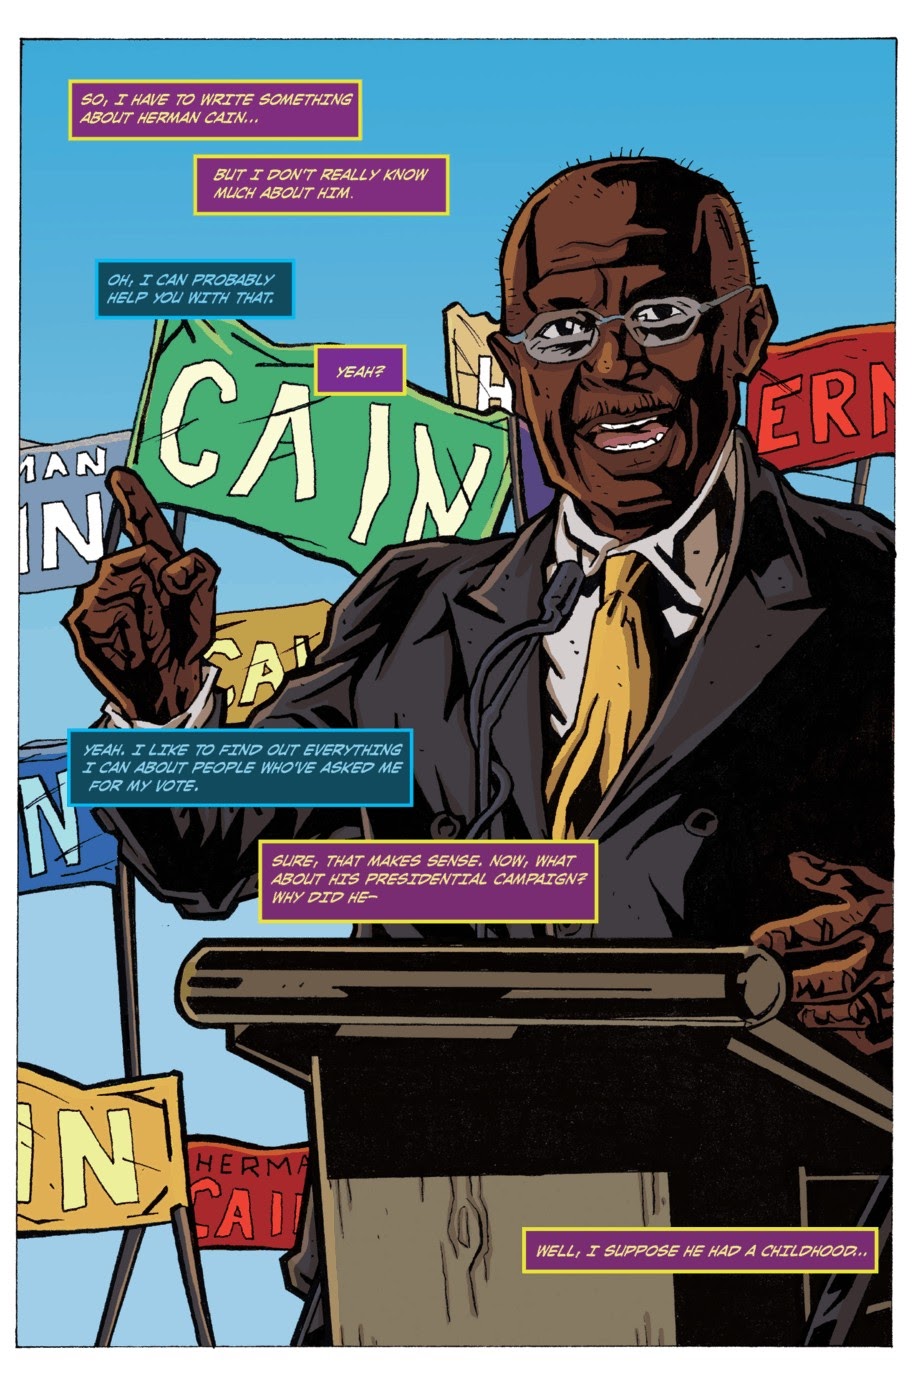 Read online Political Power: Herman Cain comic -  Issue # Full - 3